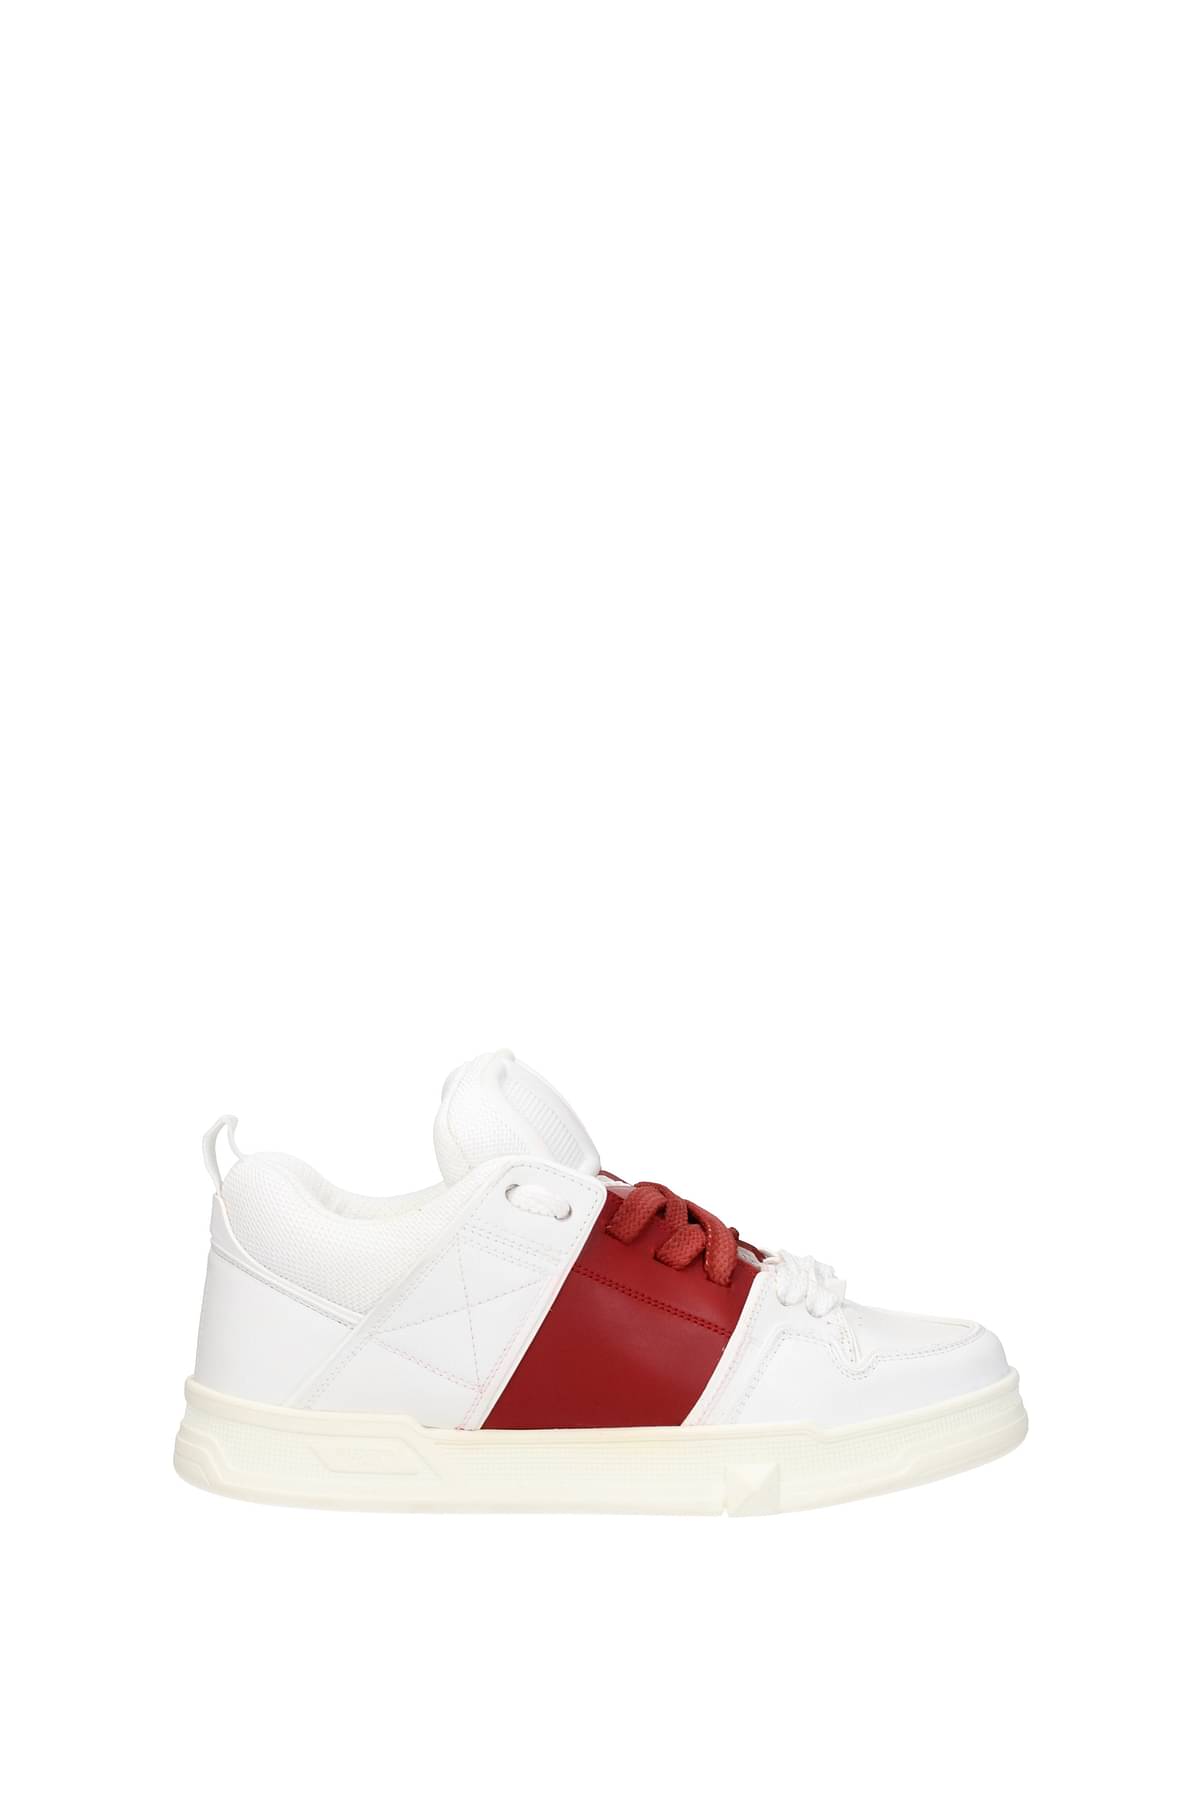 Inspirere Ydmyghed Såkaldte Valentino Garavani Sneakers Women S0FB1YPBR81 Leather White Red 525€